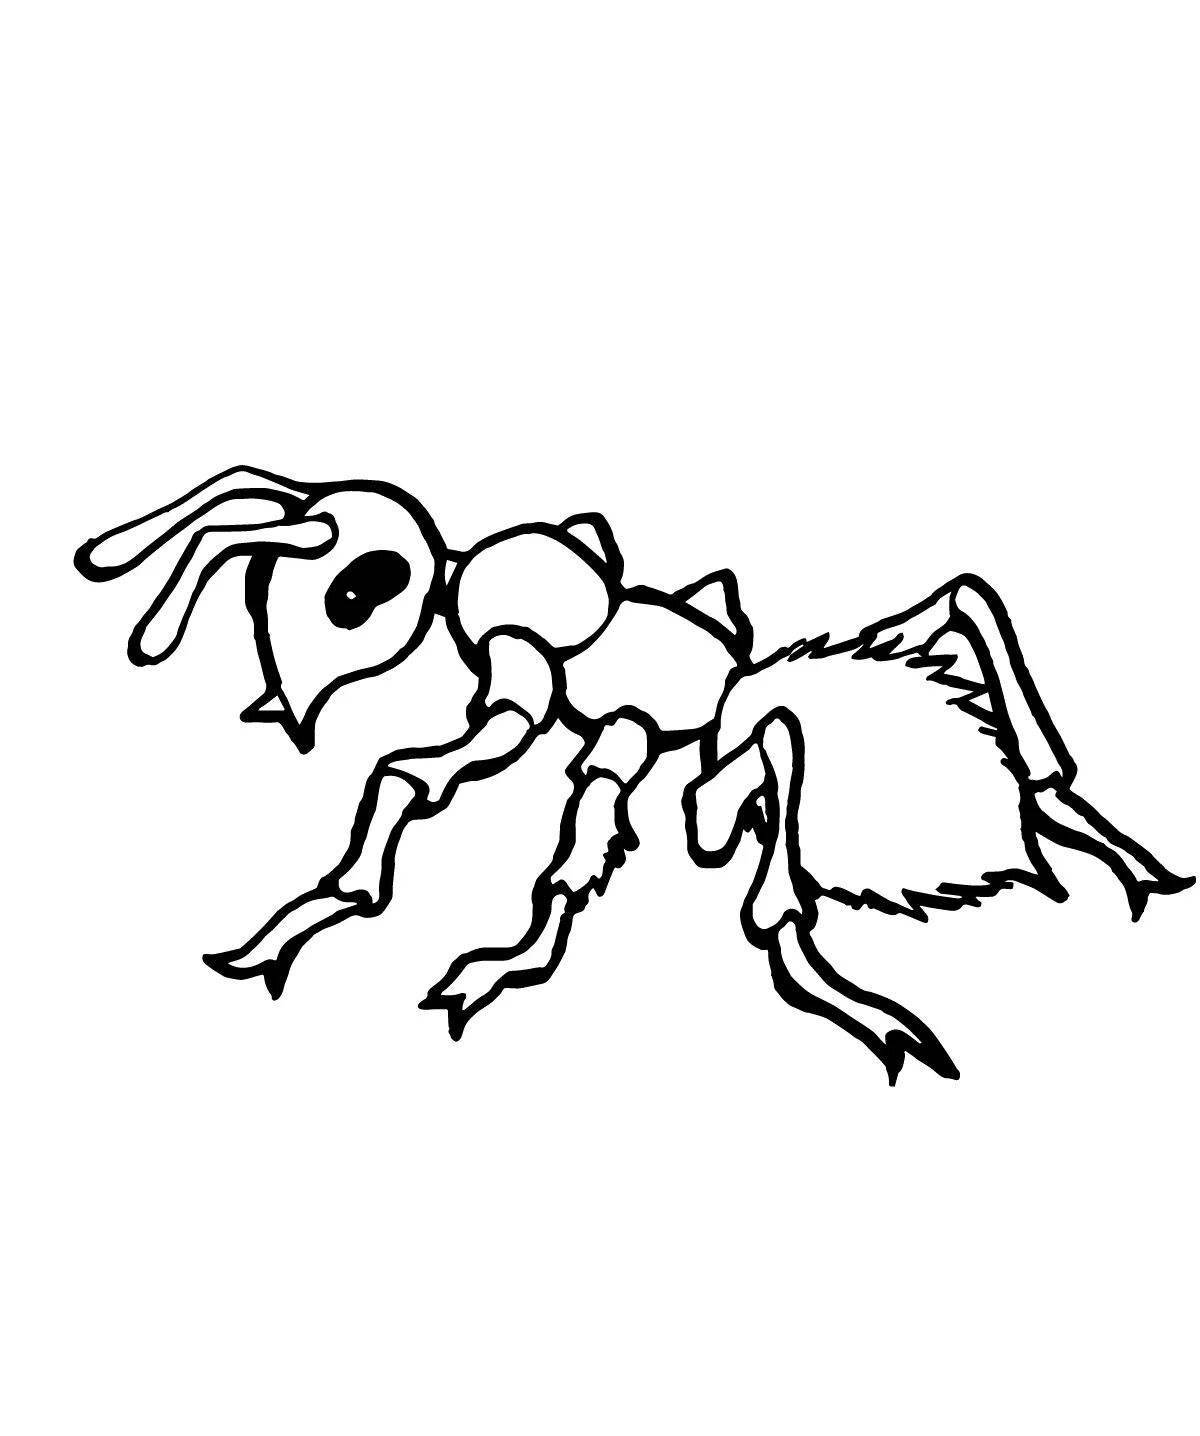 Playful ant drawing